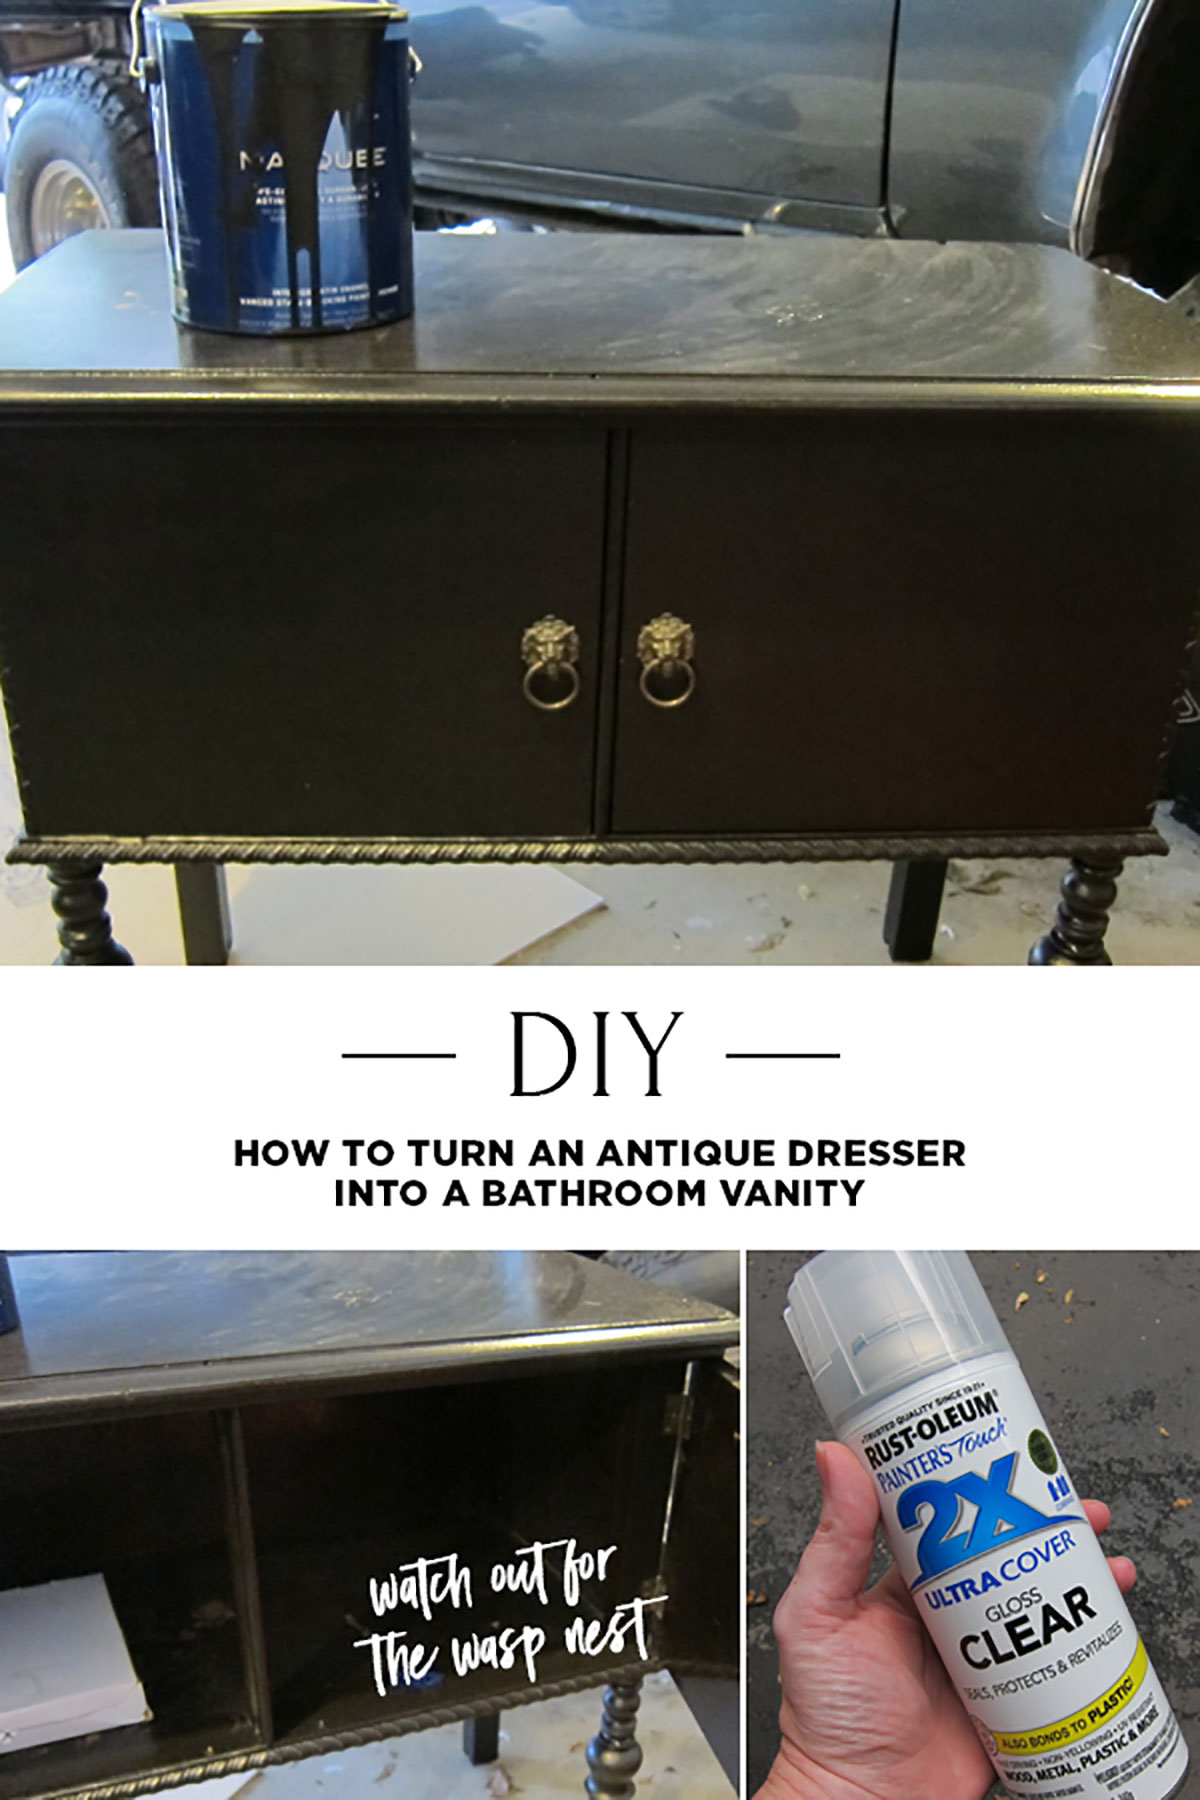 DIY How to turn an antique dresser into a bathroom vanity. 